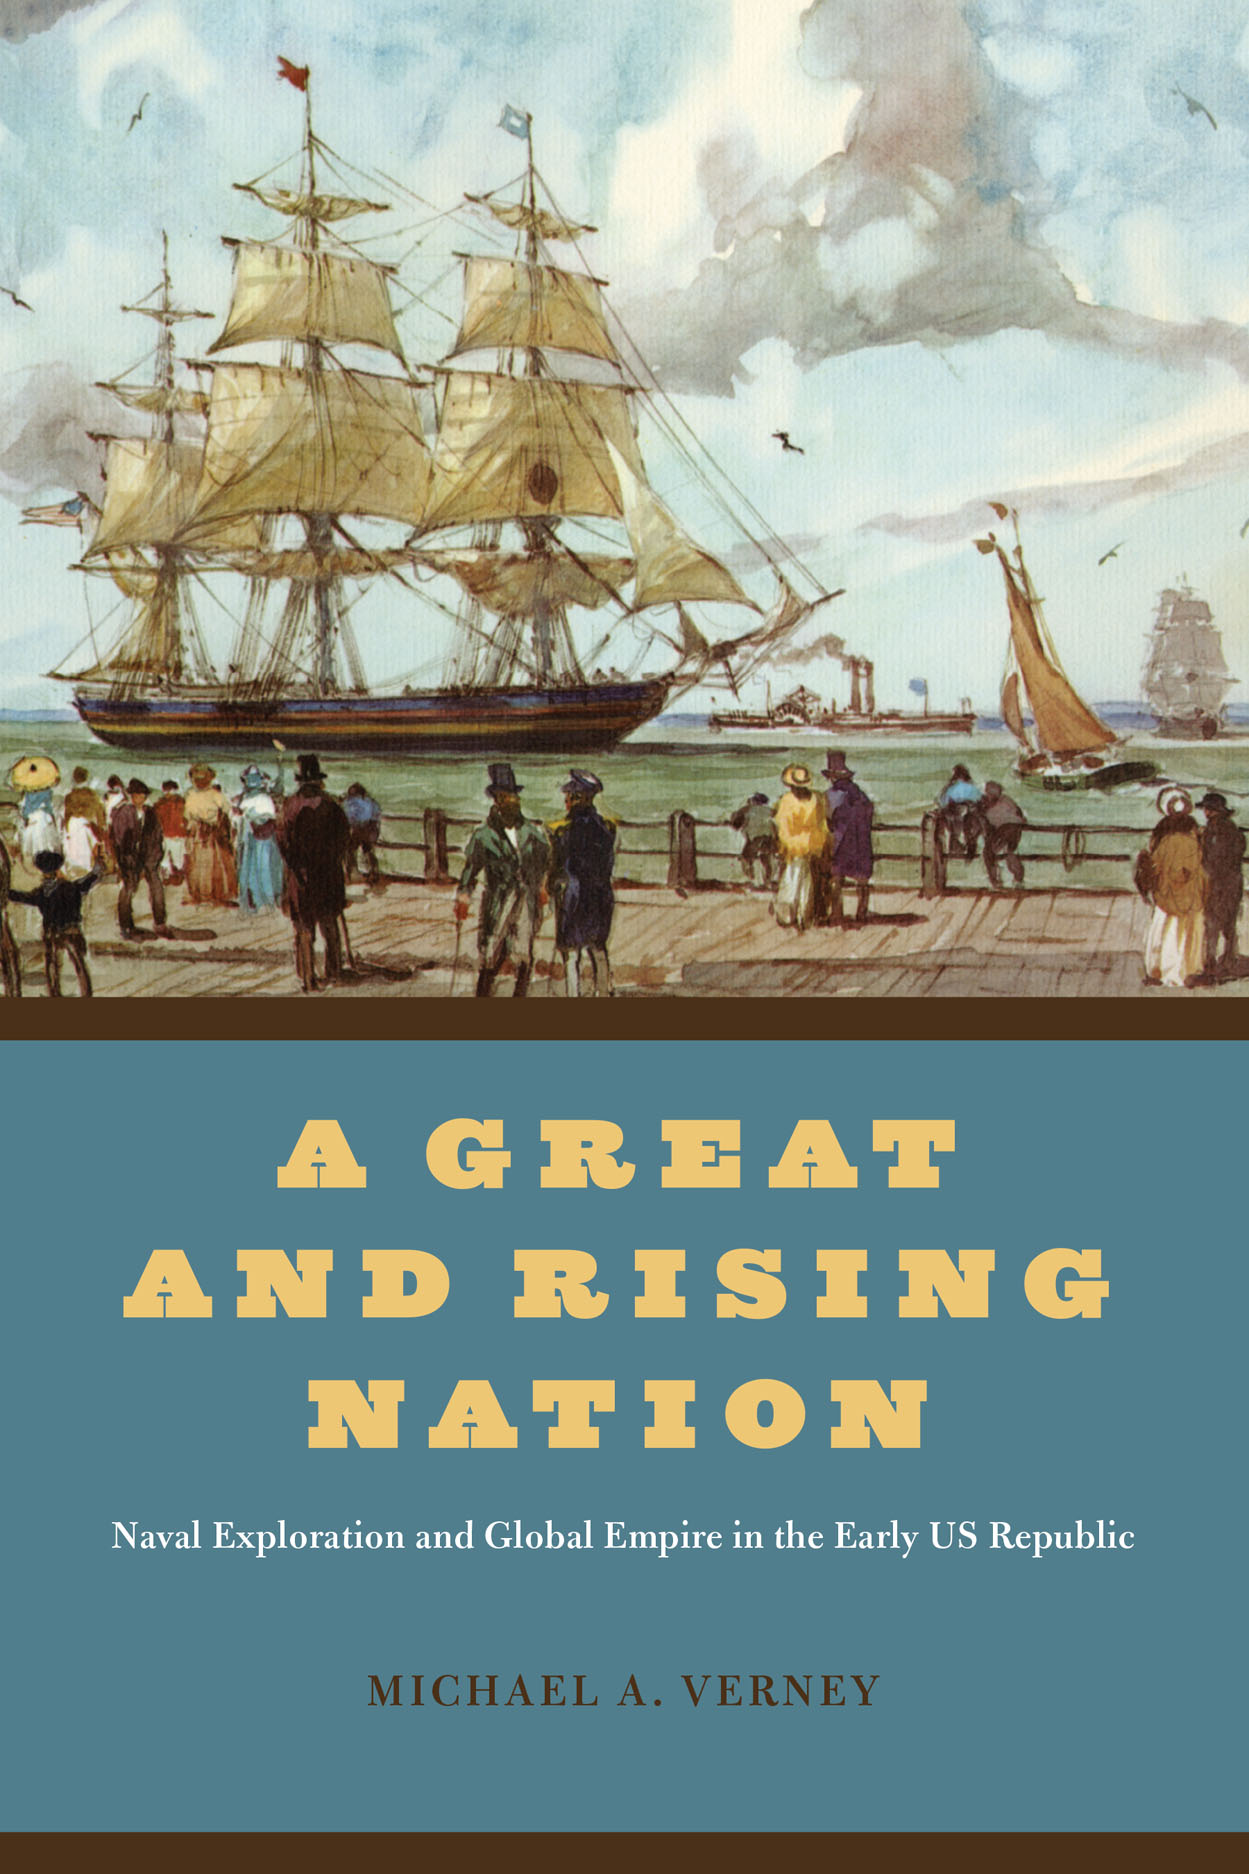 A Great and Rising Nation: Naval Exploration and Global Empire in